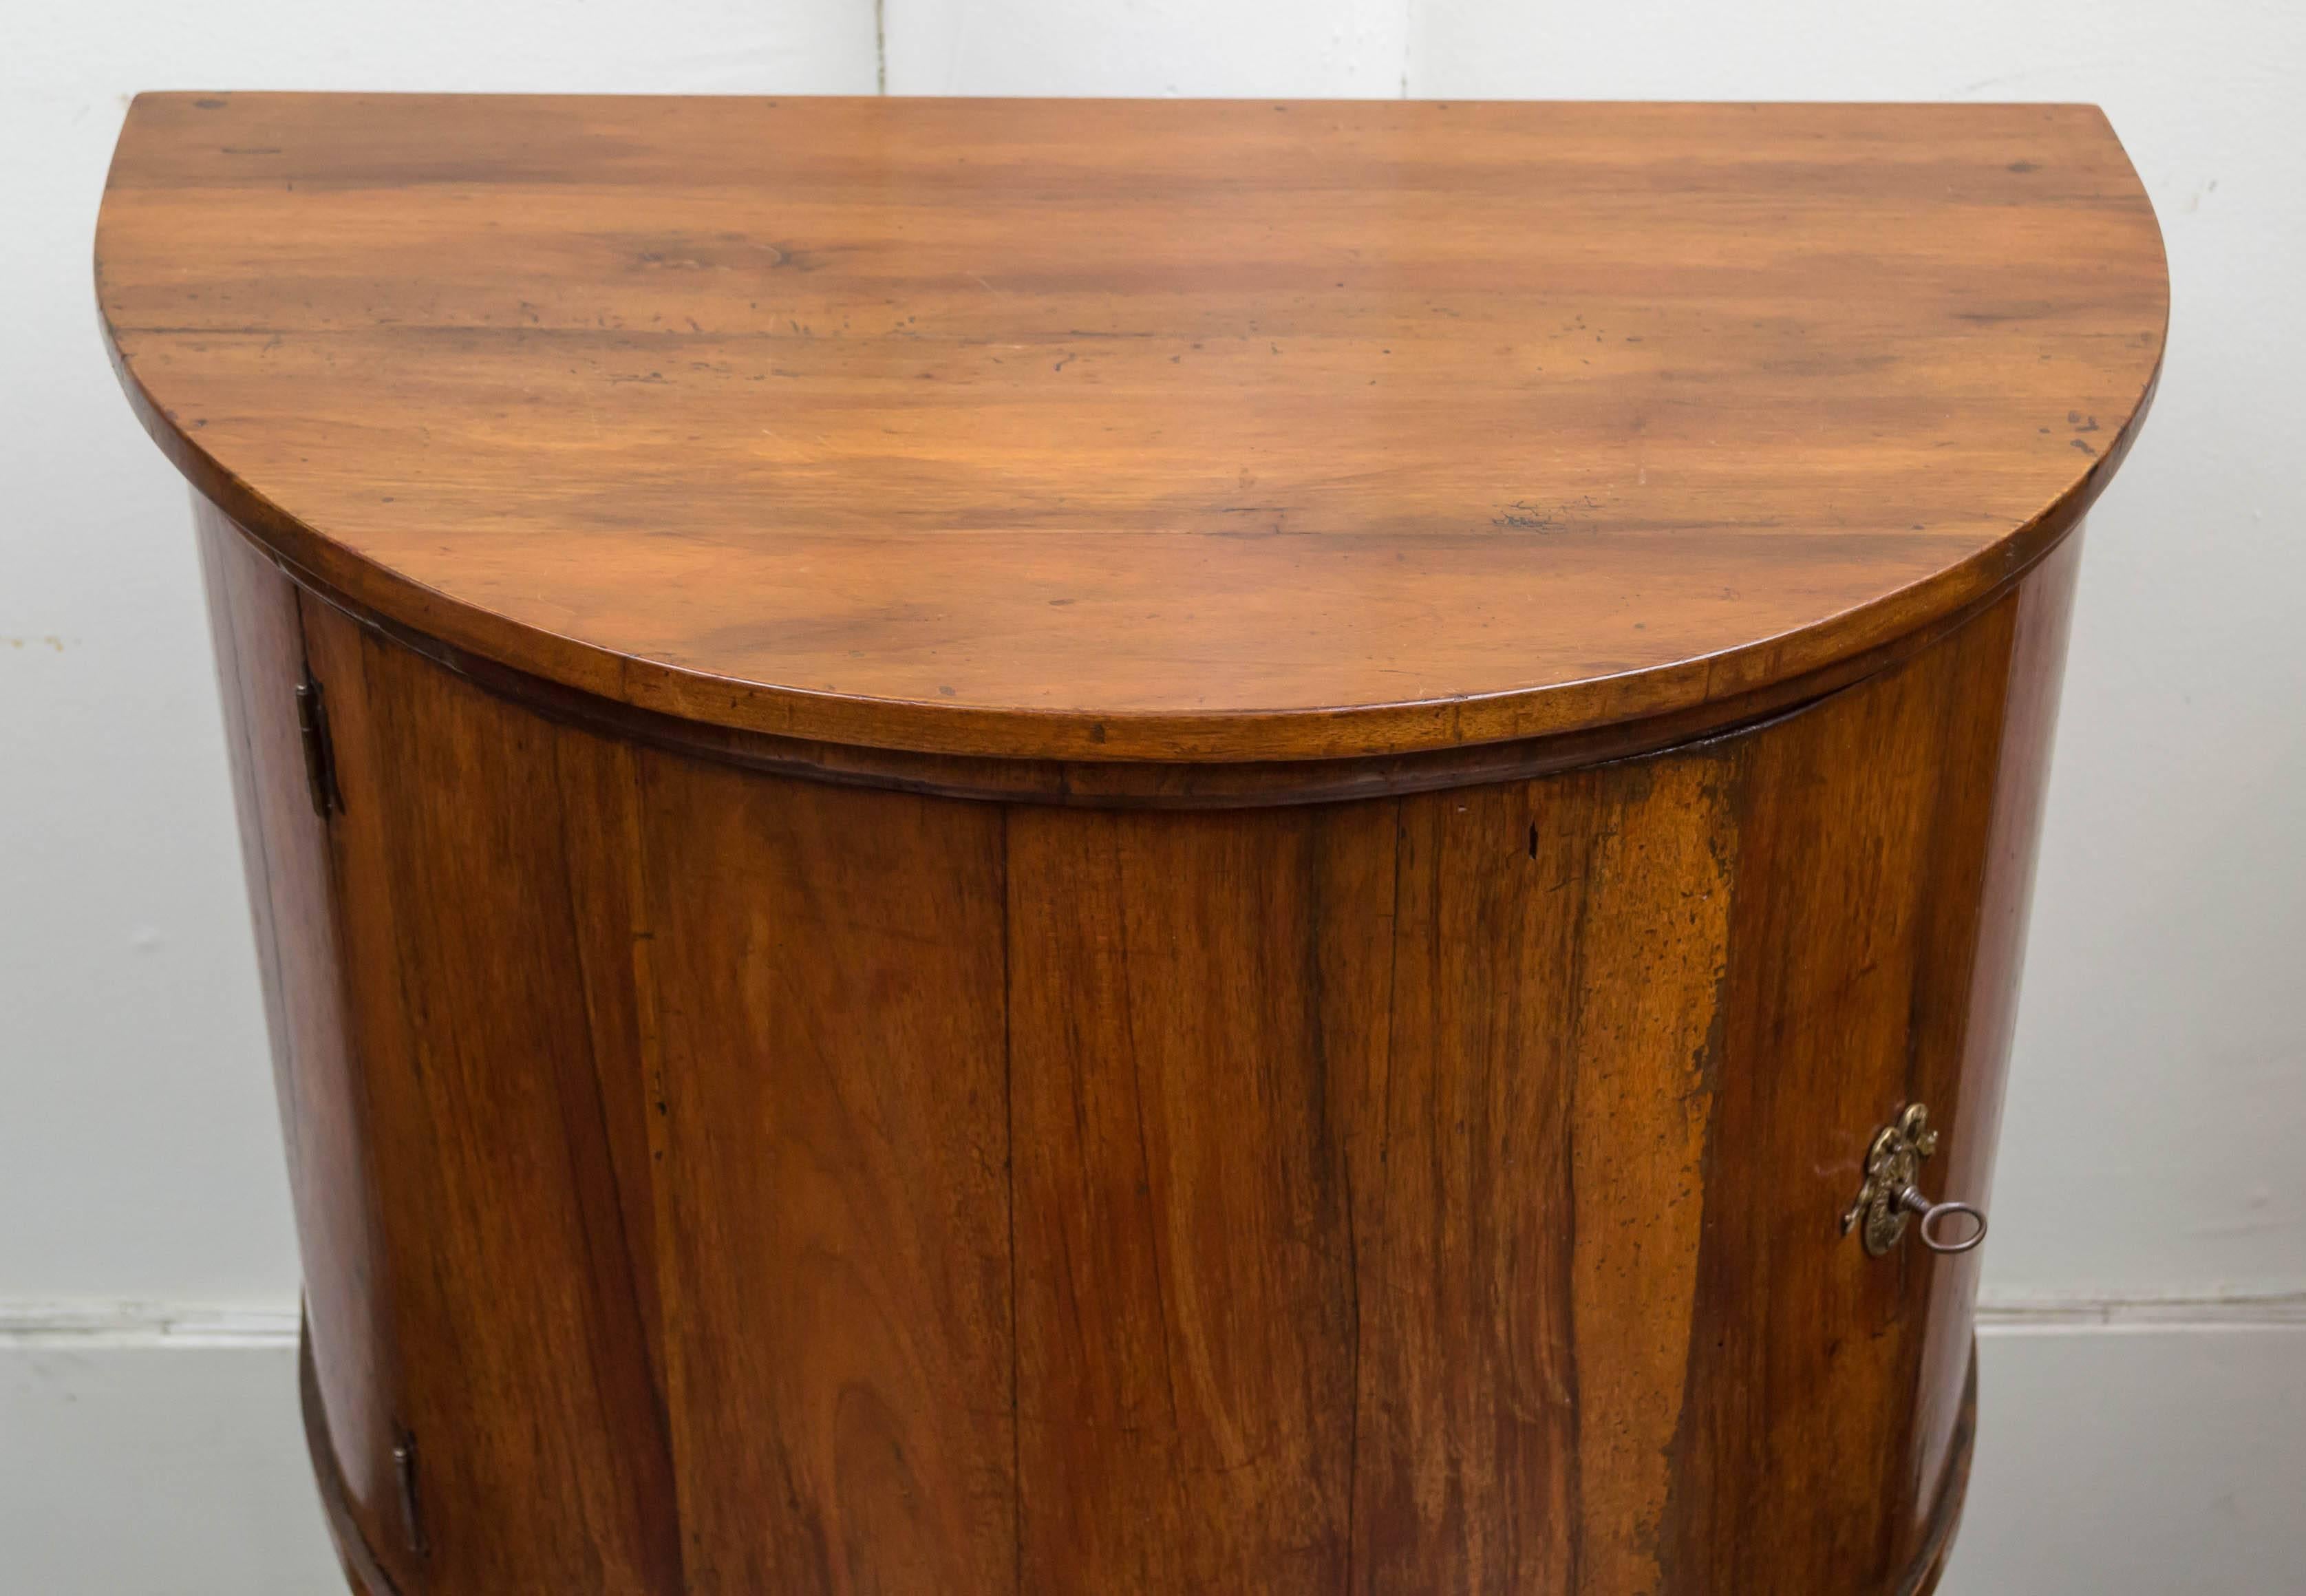 Italian walnut neoclassic demilune cabinet, circa 1790. Solid walnut top and front with contrasting figure to the boards. Splayed legs are reinforced and sturdy. A good small-scale size cabinet that can be used in a number of places.
Working lock